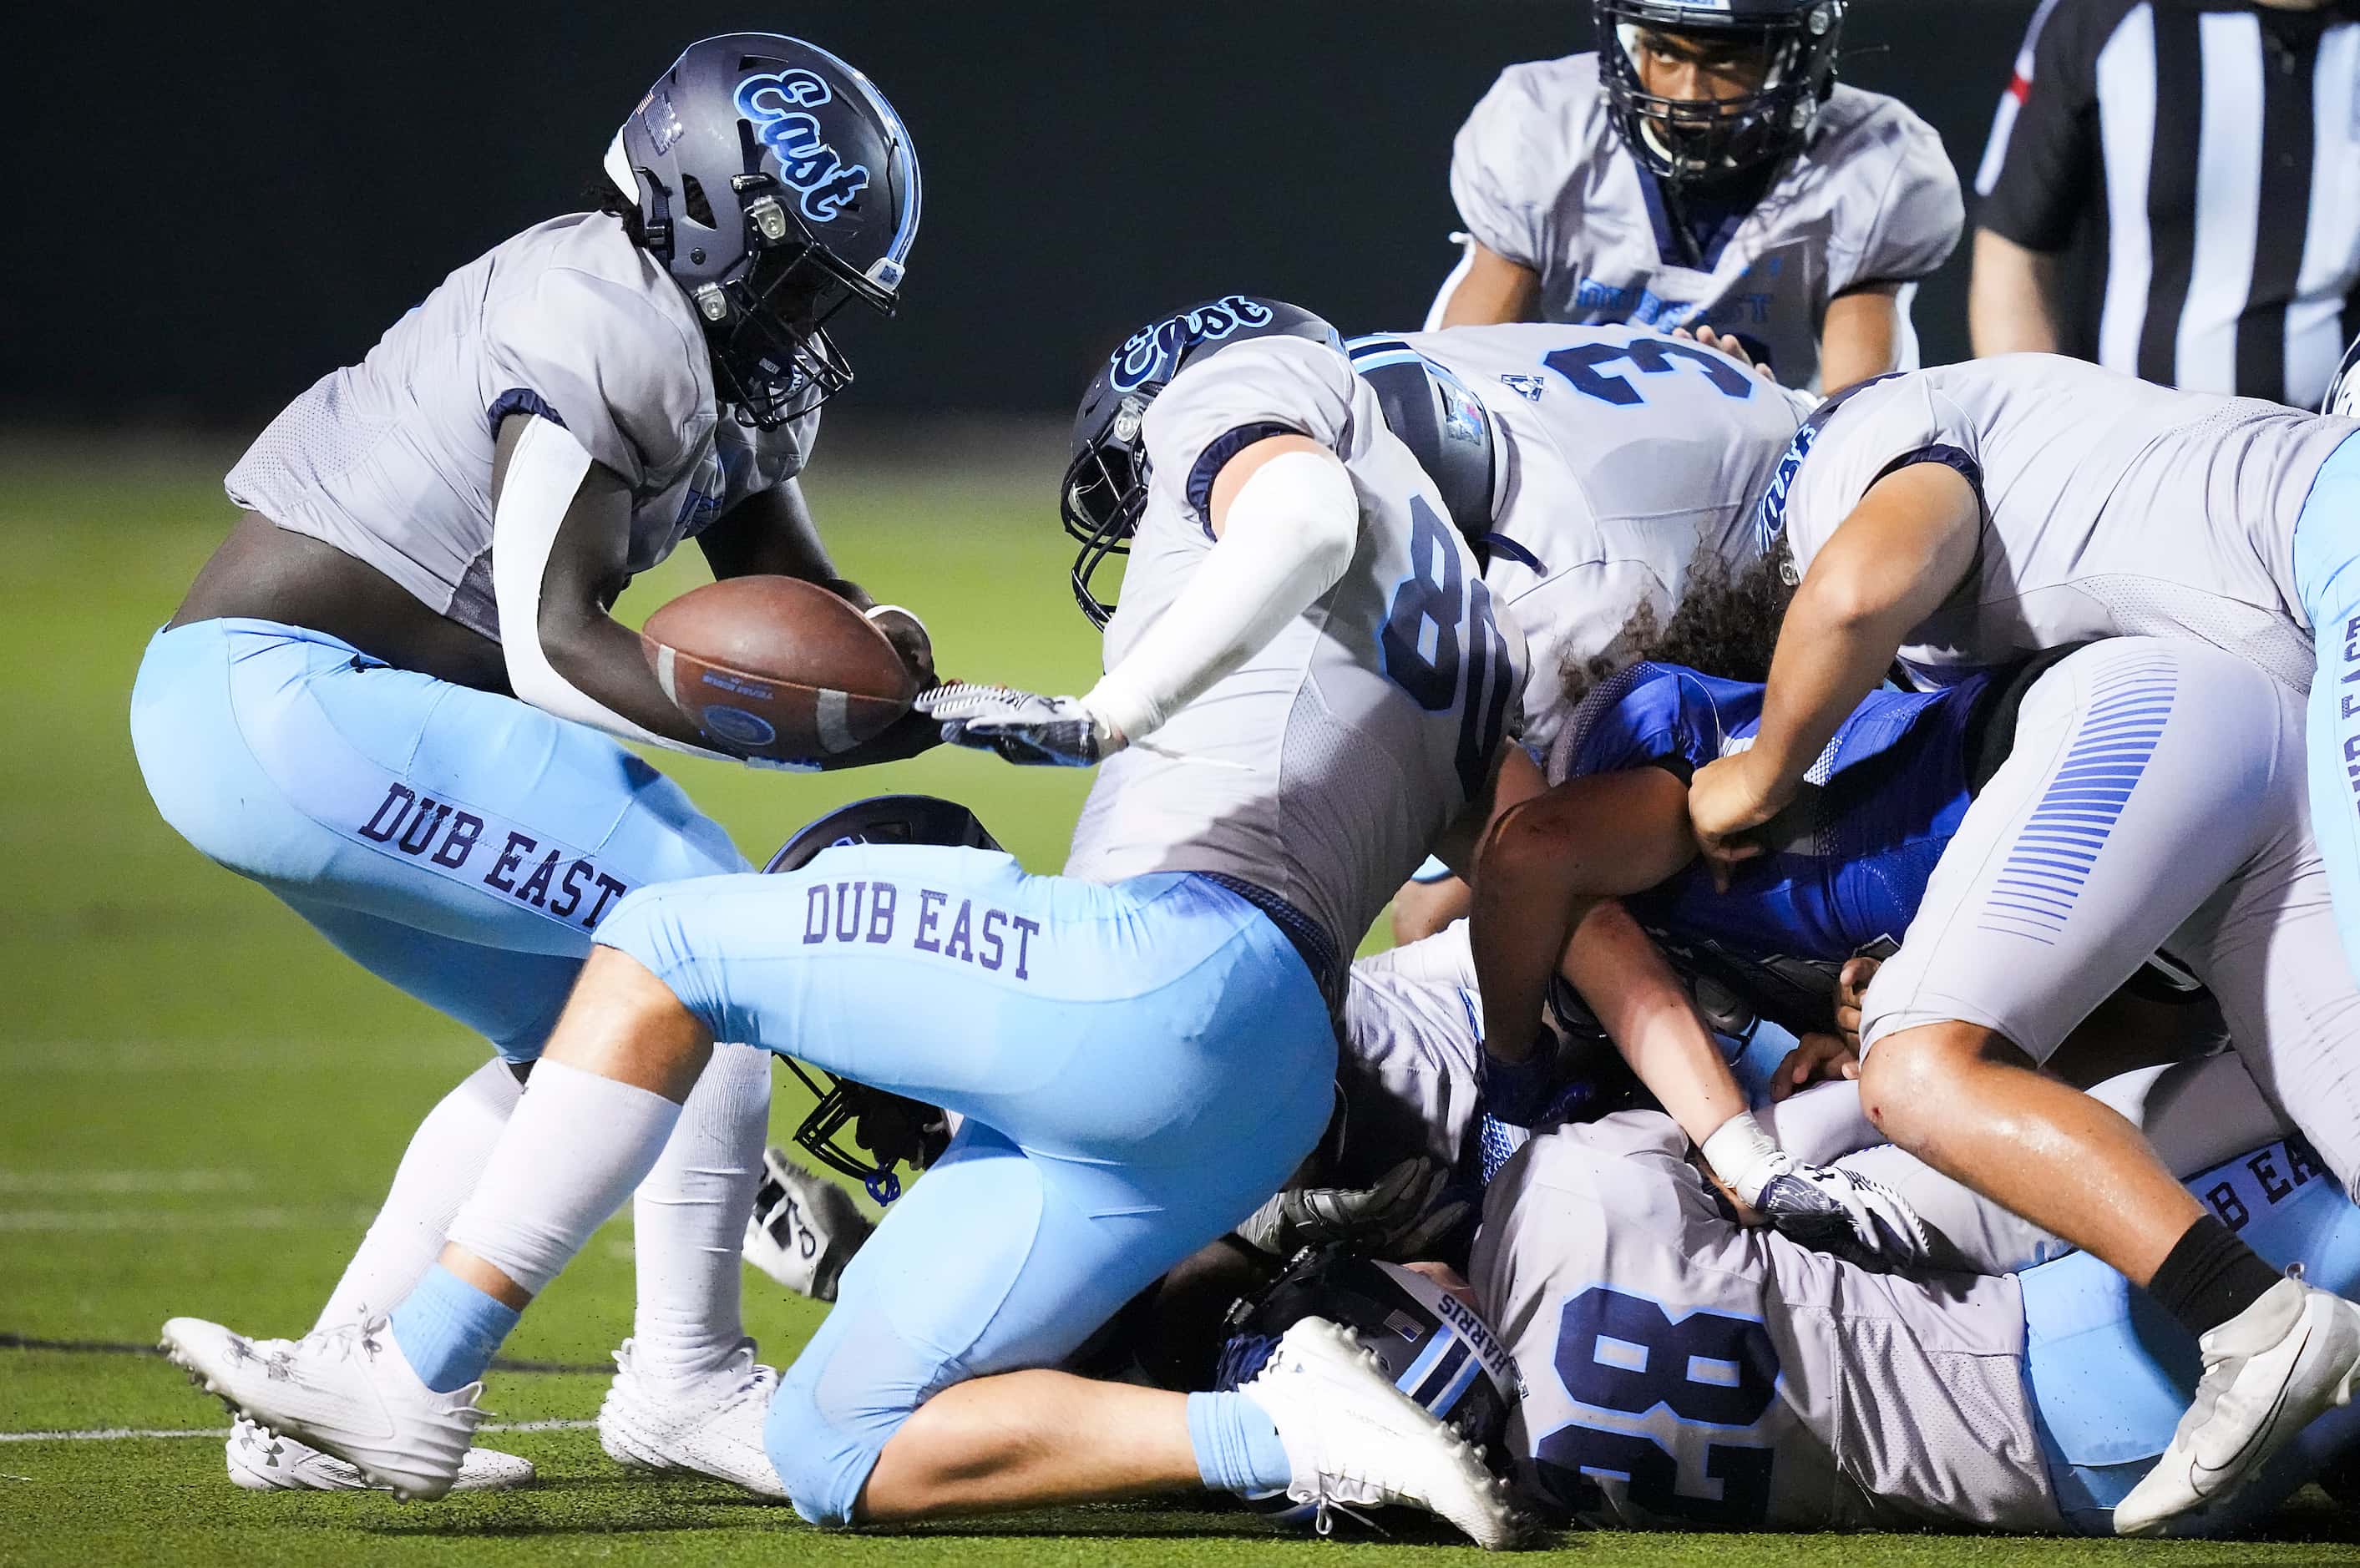 Wylie East running back Keve'yon Thorne (left) recovers a fumble by Grand Prairie running...